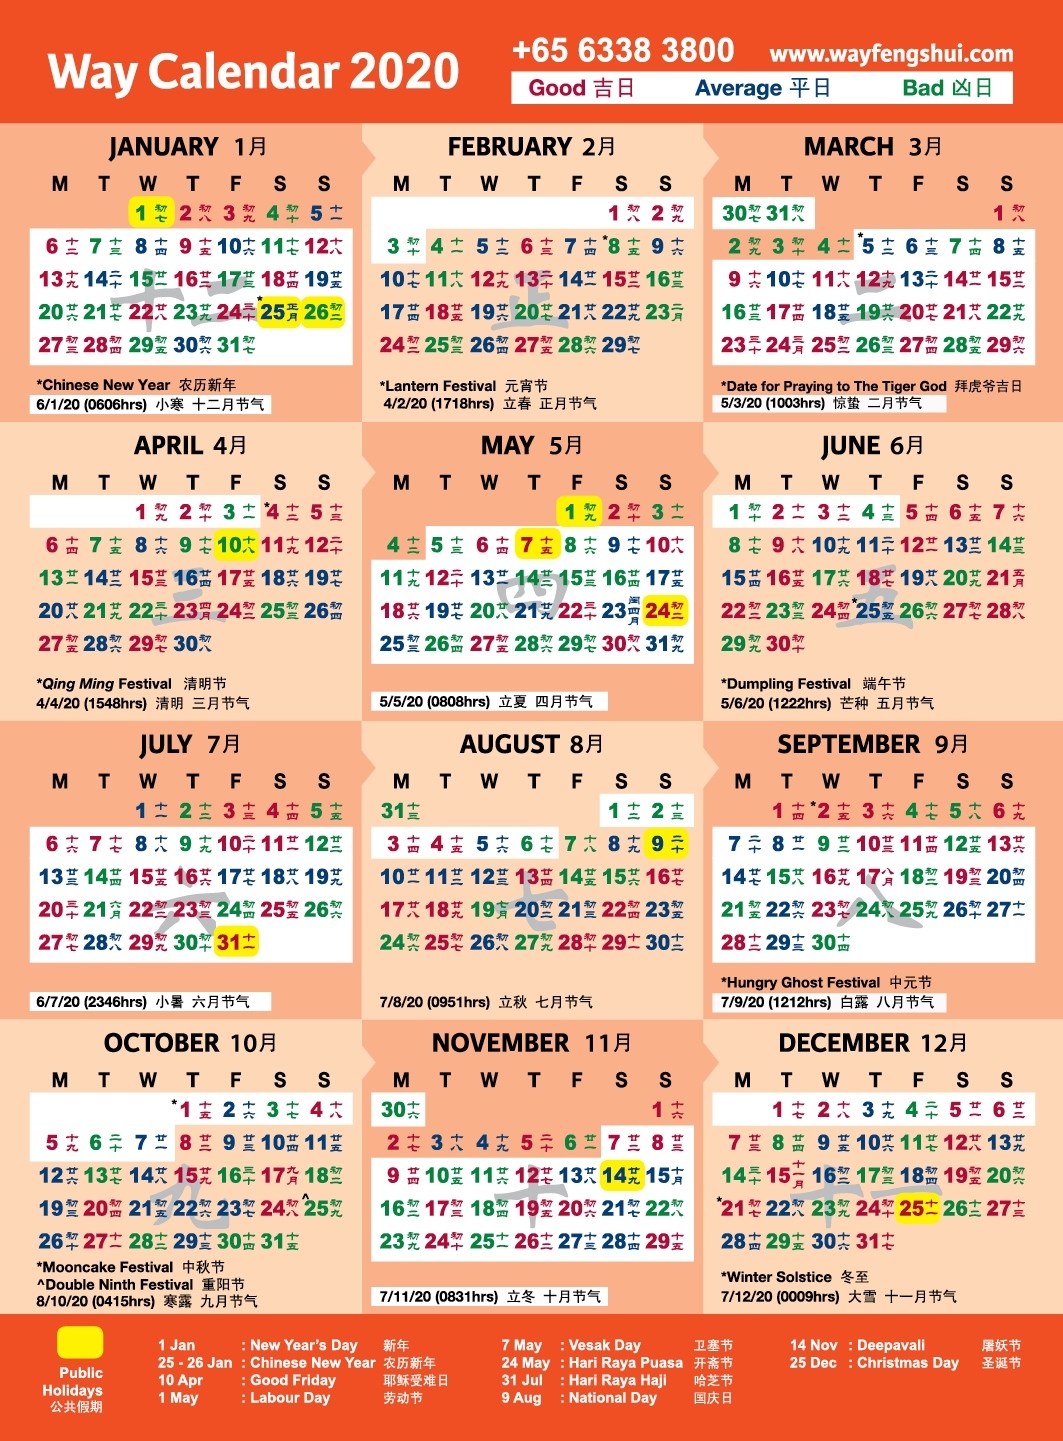 2020 Way Calendar - Feng Shui Master Singapore, Chinese 2020 Calender With Luner Dates